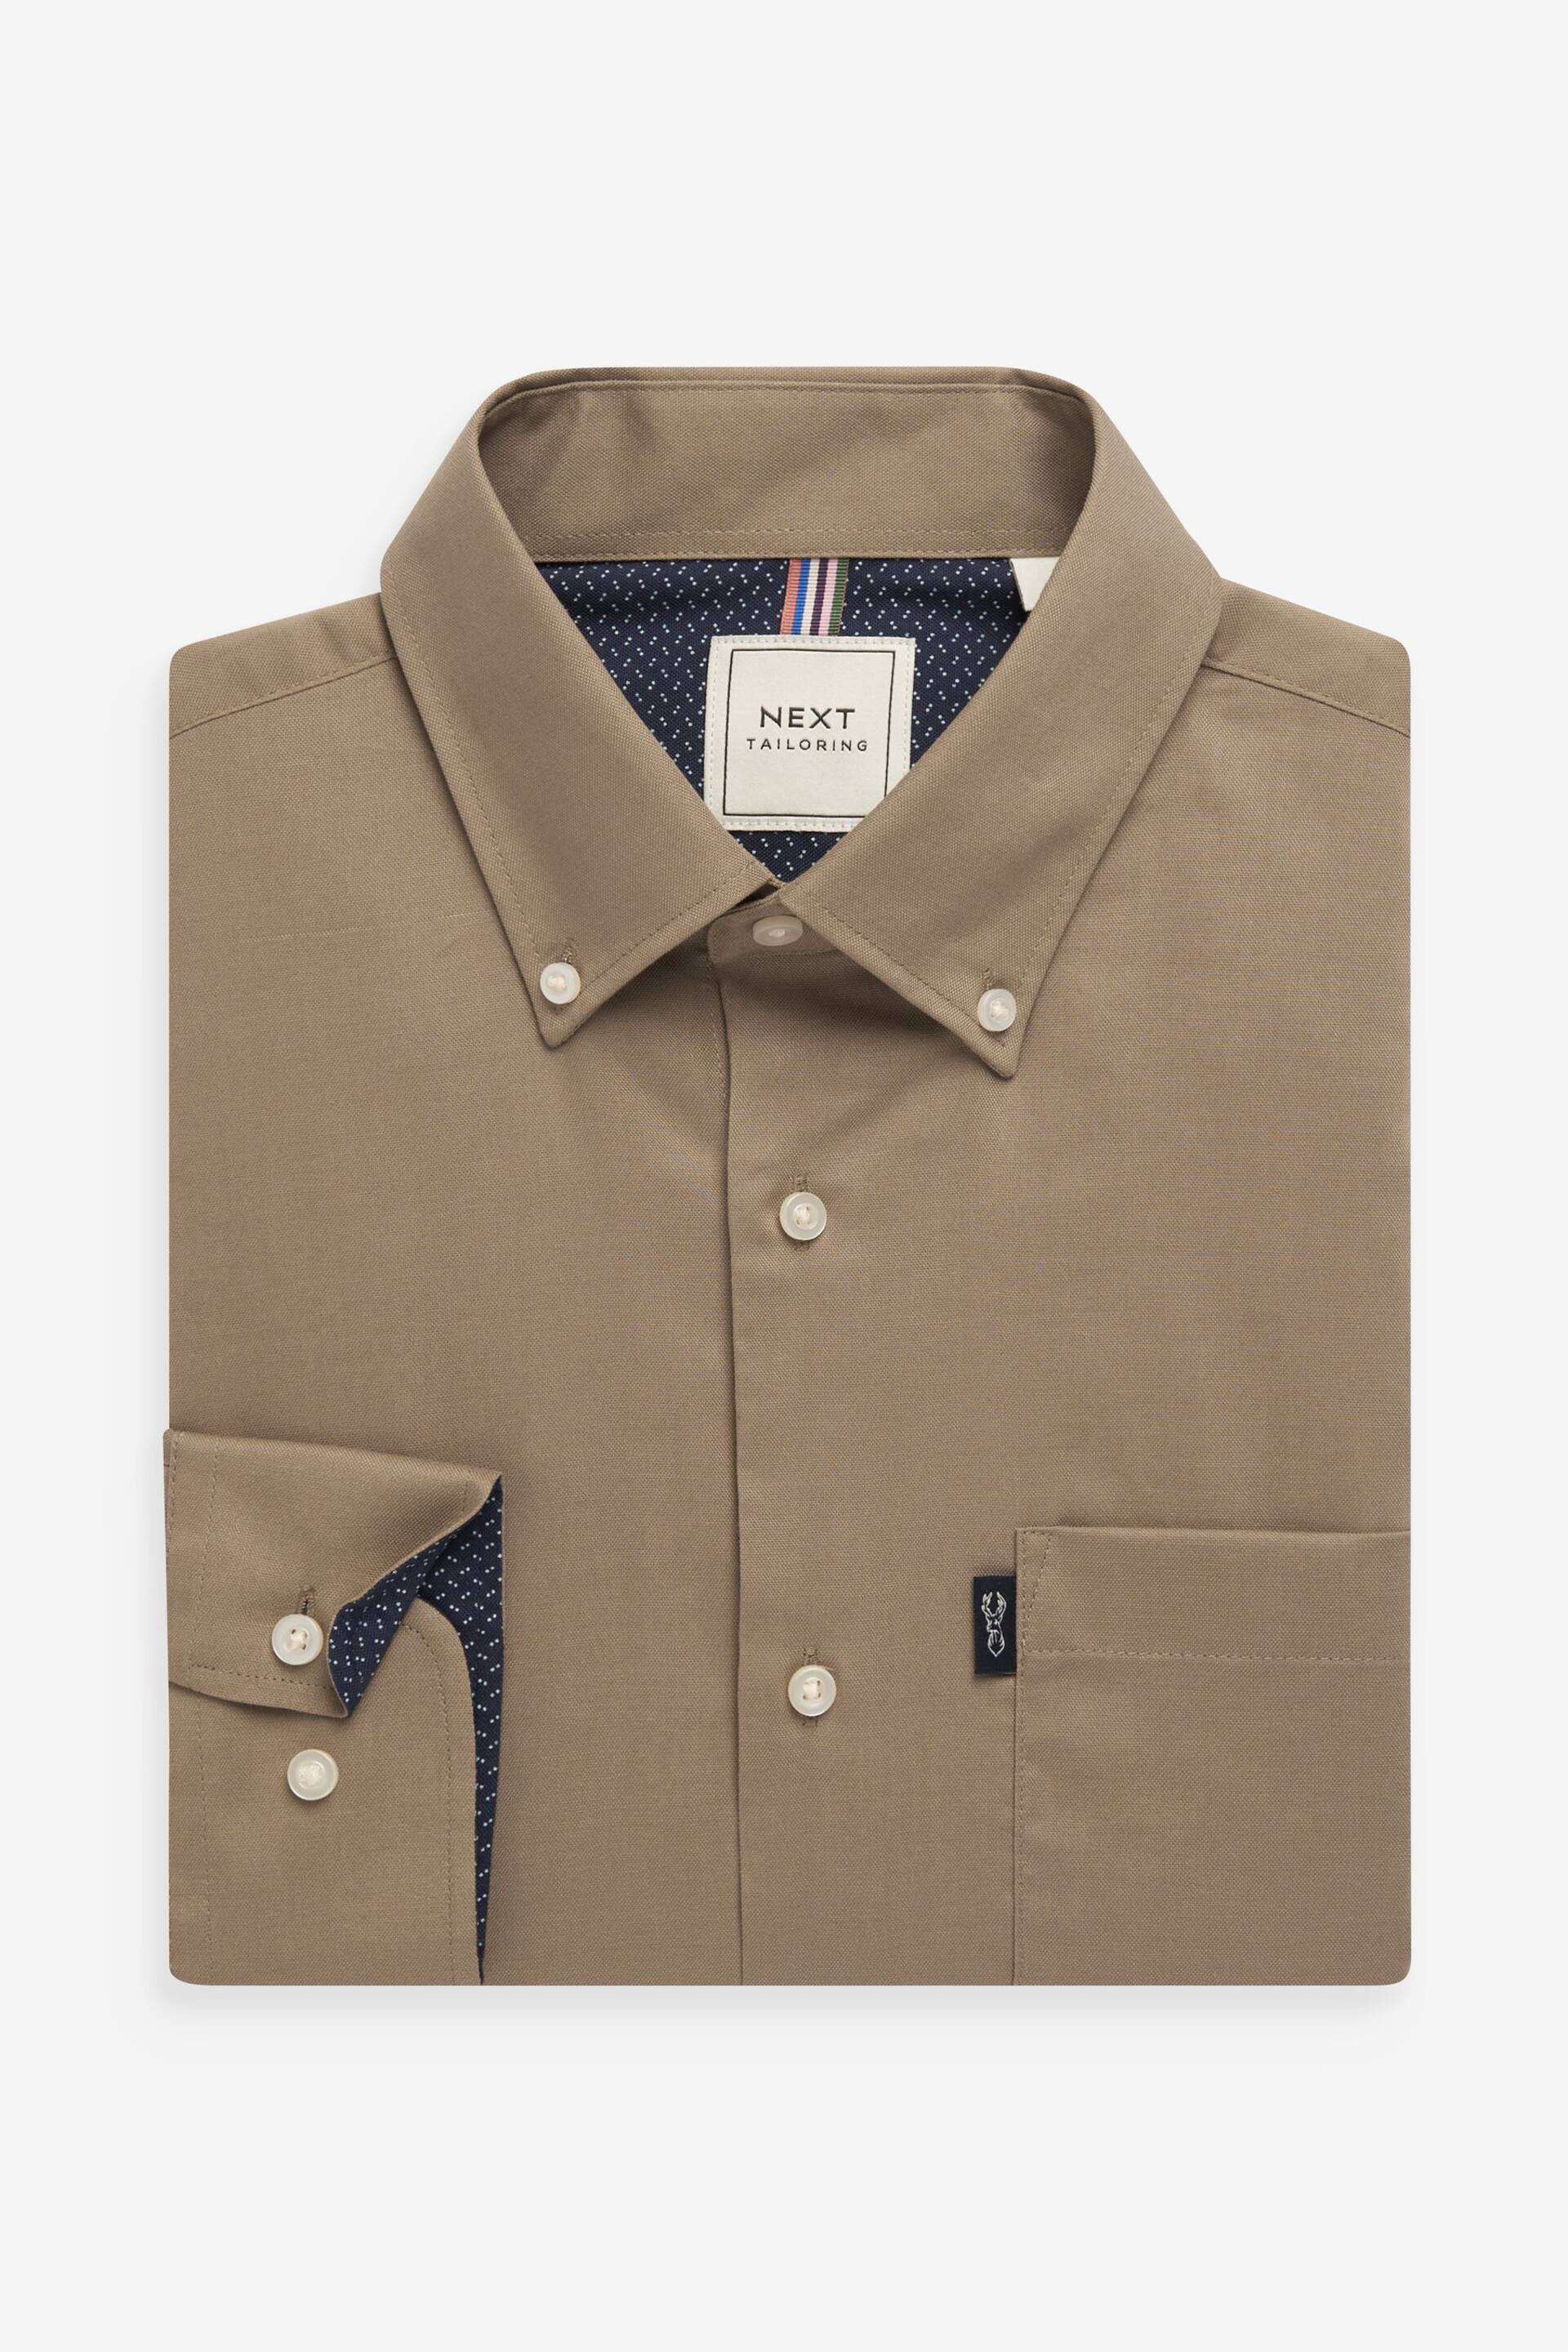 Neutral Brown Regular Fit Easy Iron Button Down Oxford Shirt - Image 7 of 9